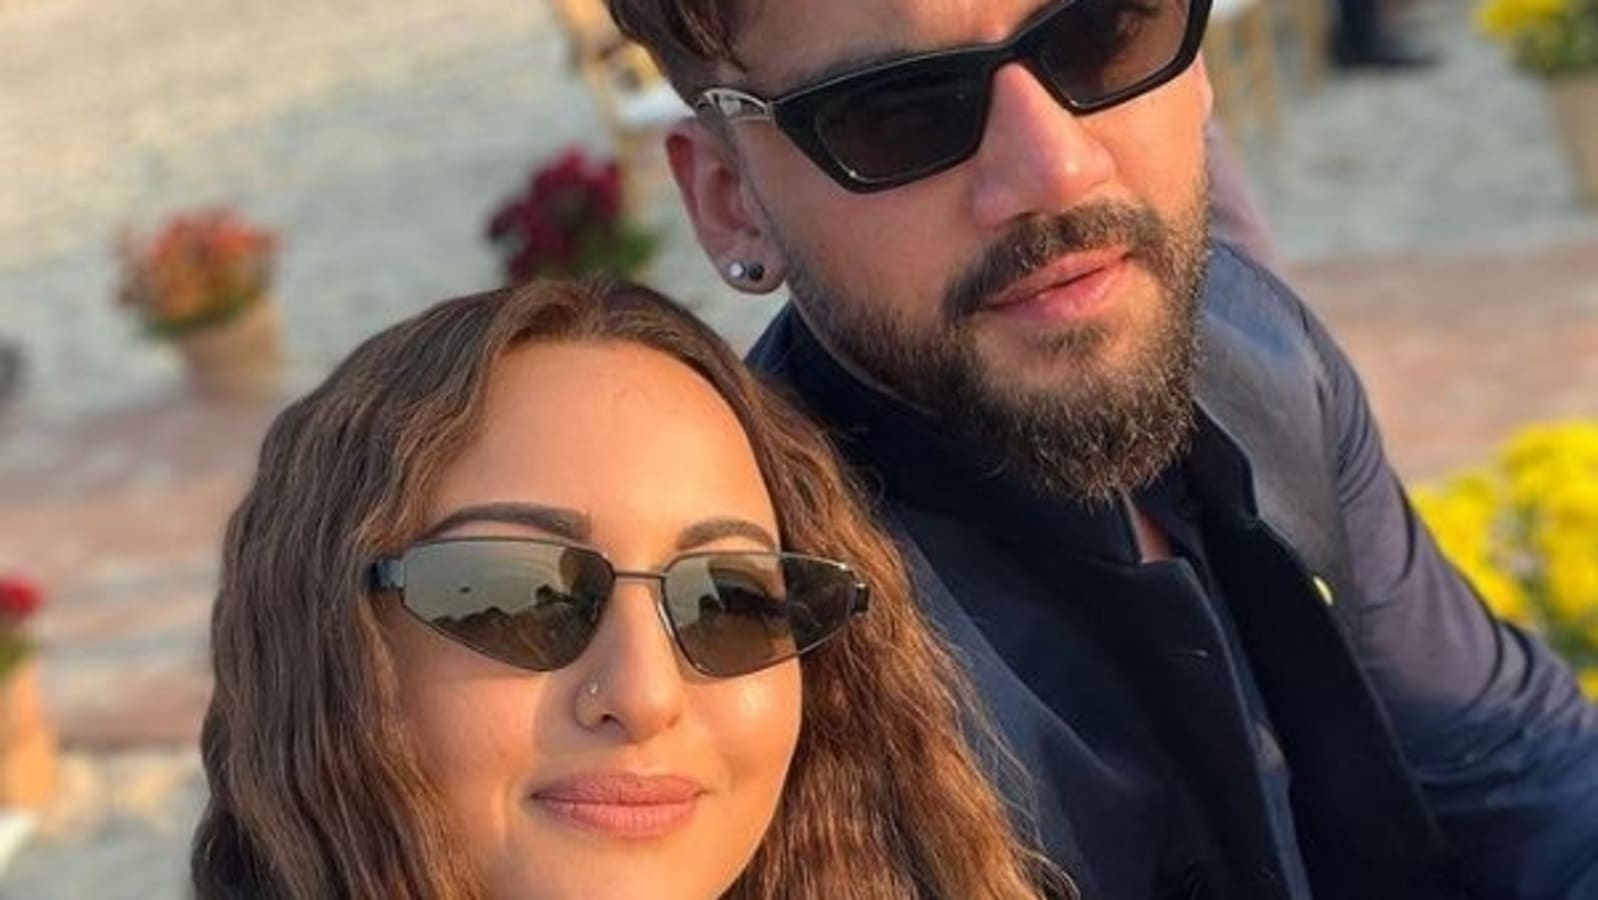 Sonakshi Sinha X Videos - Sonakshi Sinha and Zaheer Iqbal say 'I Love You' to each other. Watch video  | Bollywood - Hindustan Times